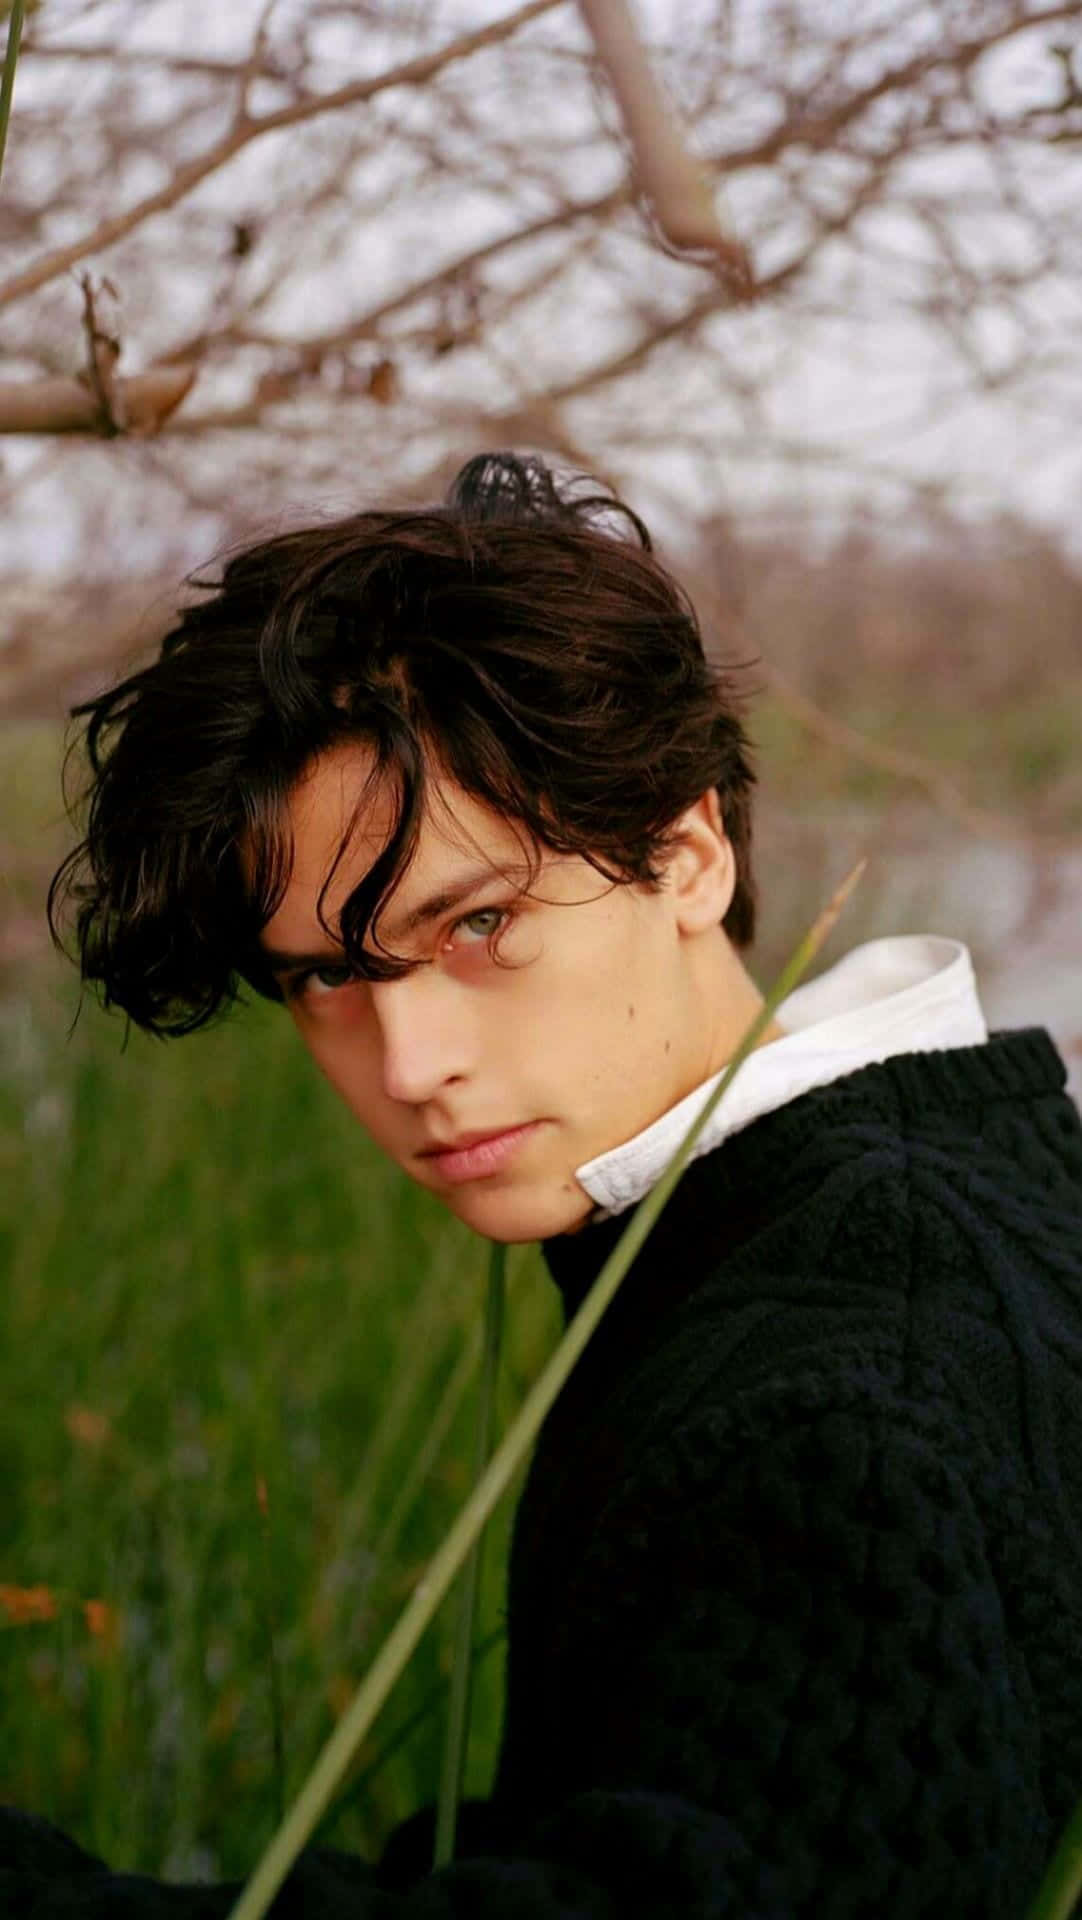 Cole Sprouse Looking Thoughtfully Into The Distance. Wallpaper